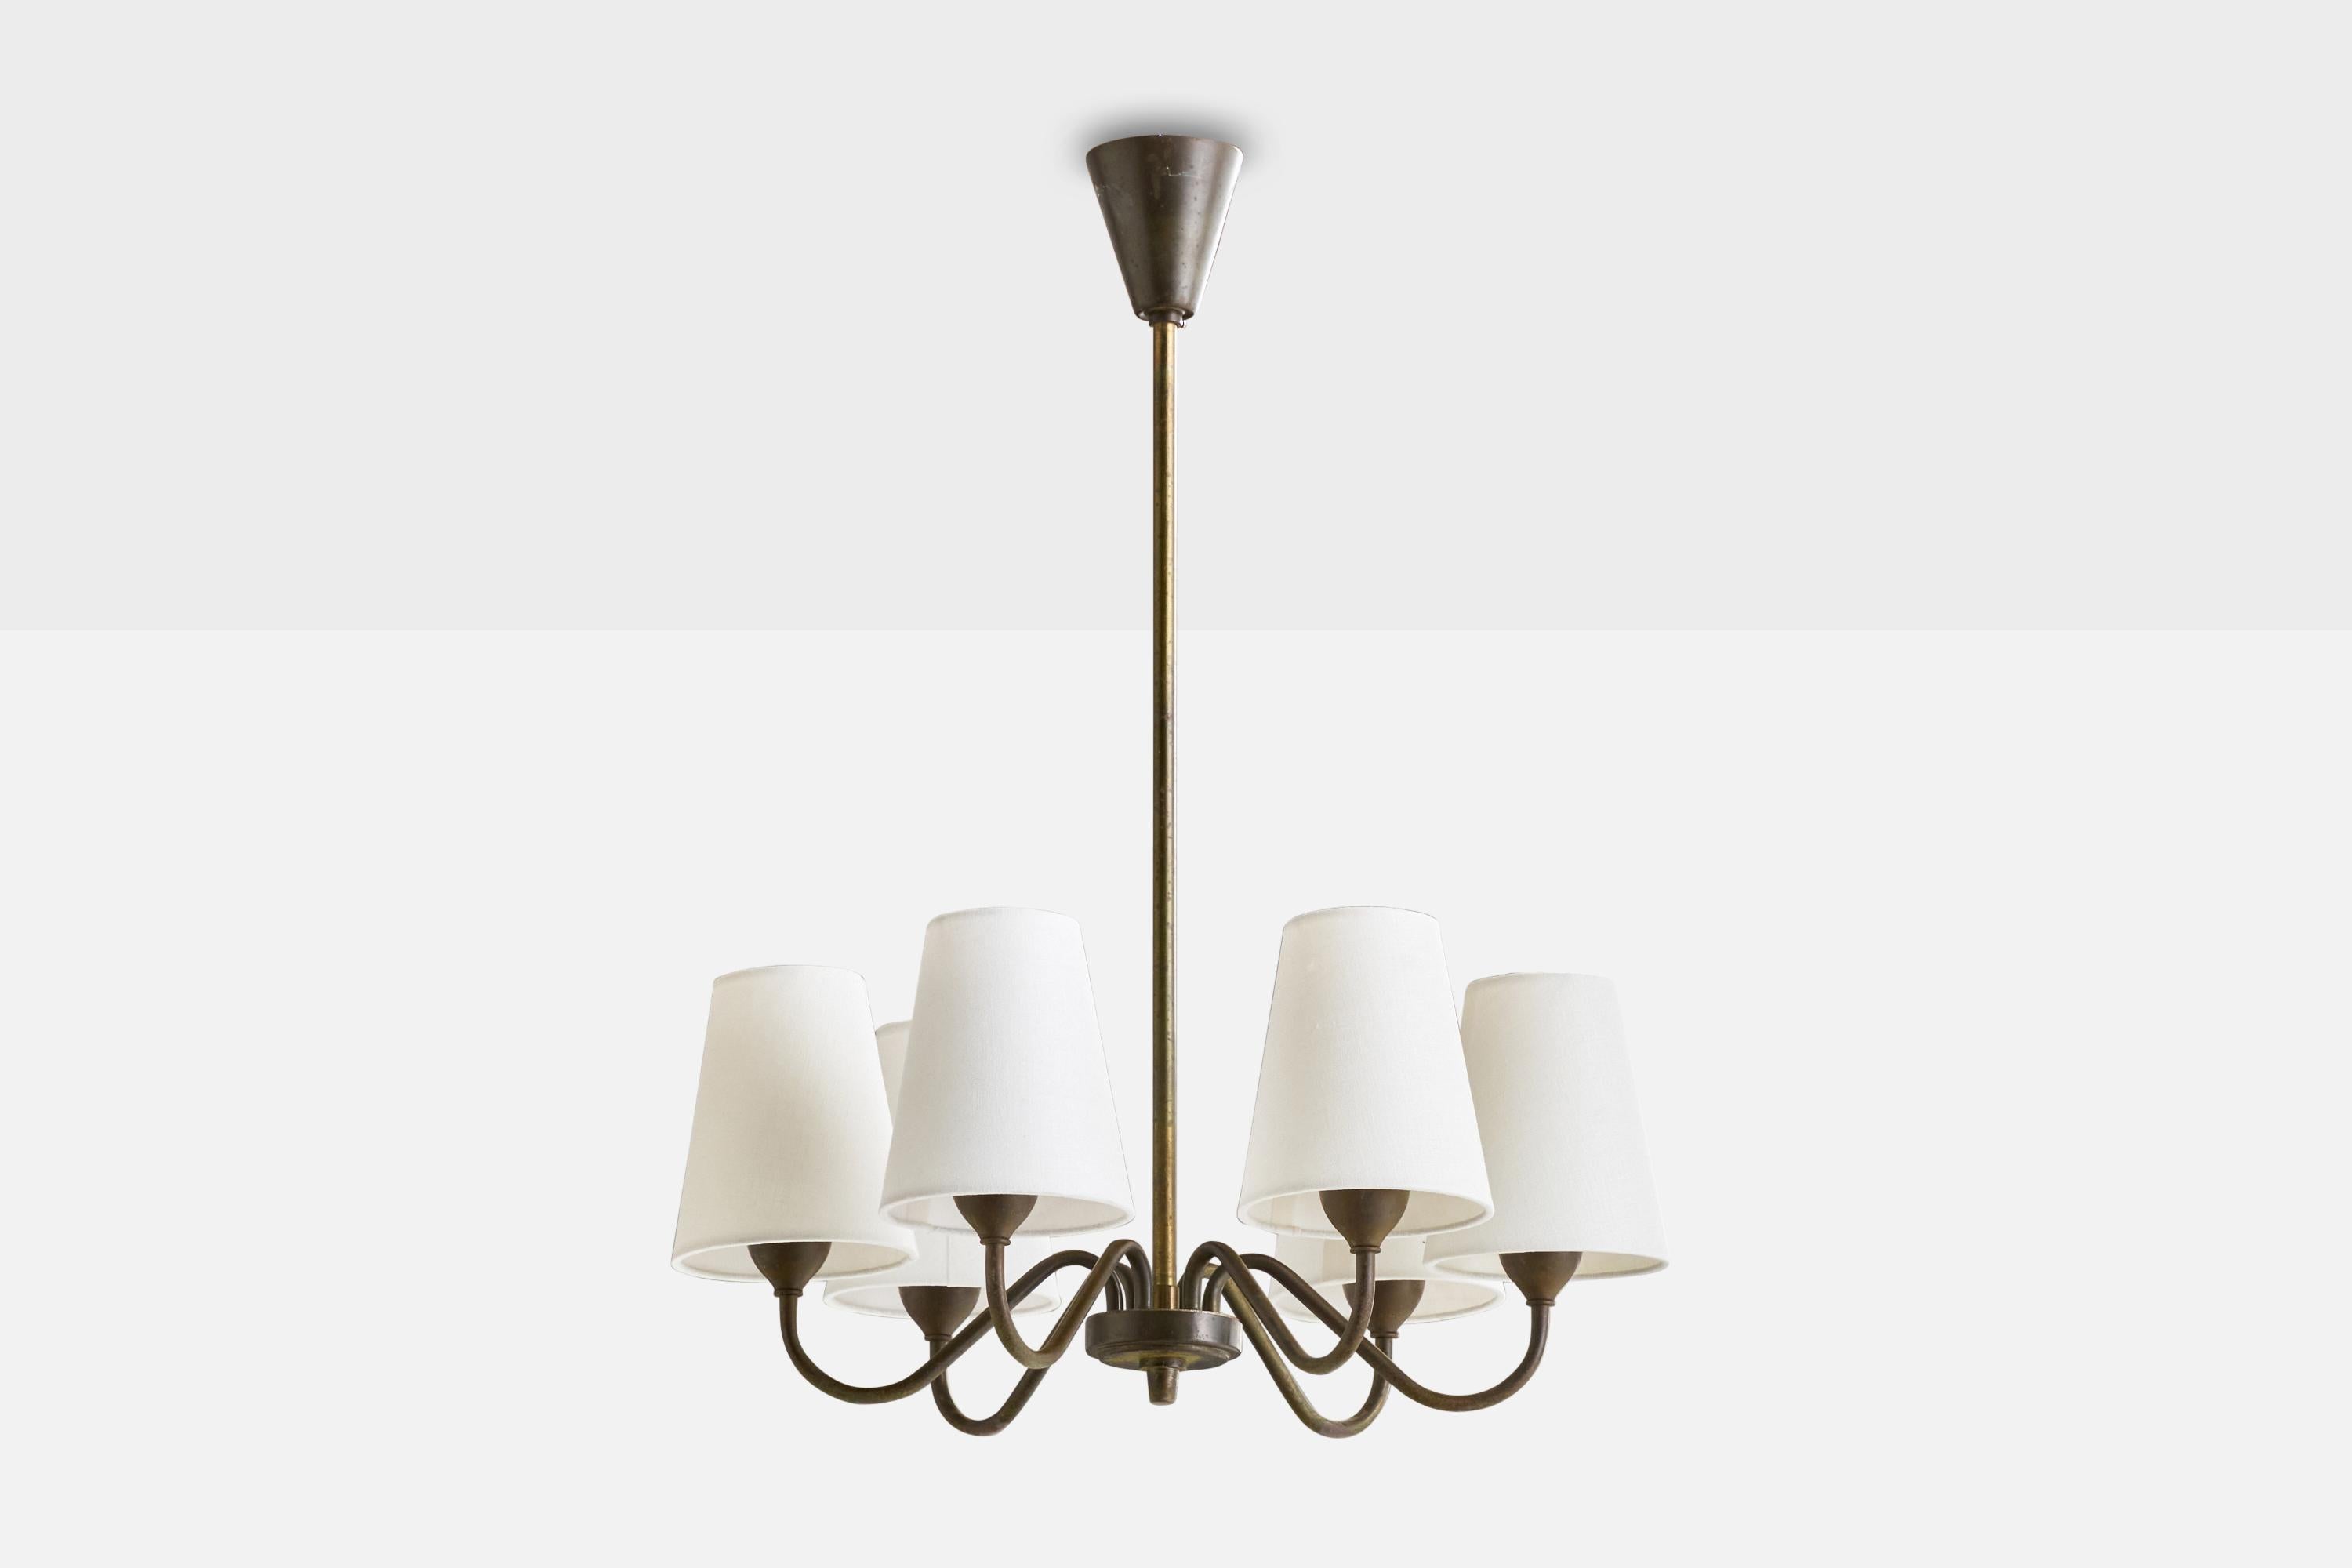 A brass and white fabric chandelier designed and produced by Fog & Mørup, Denmark, 1940s.

Dimensions of canopy (inches): 3.5” H x 3.25” Diameter
Model originally mounted with glass difussers.
Socket takes standard E-14 bulbs. 6 sockets.There is no